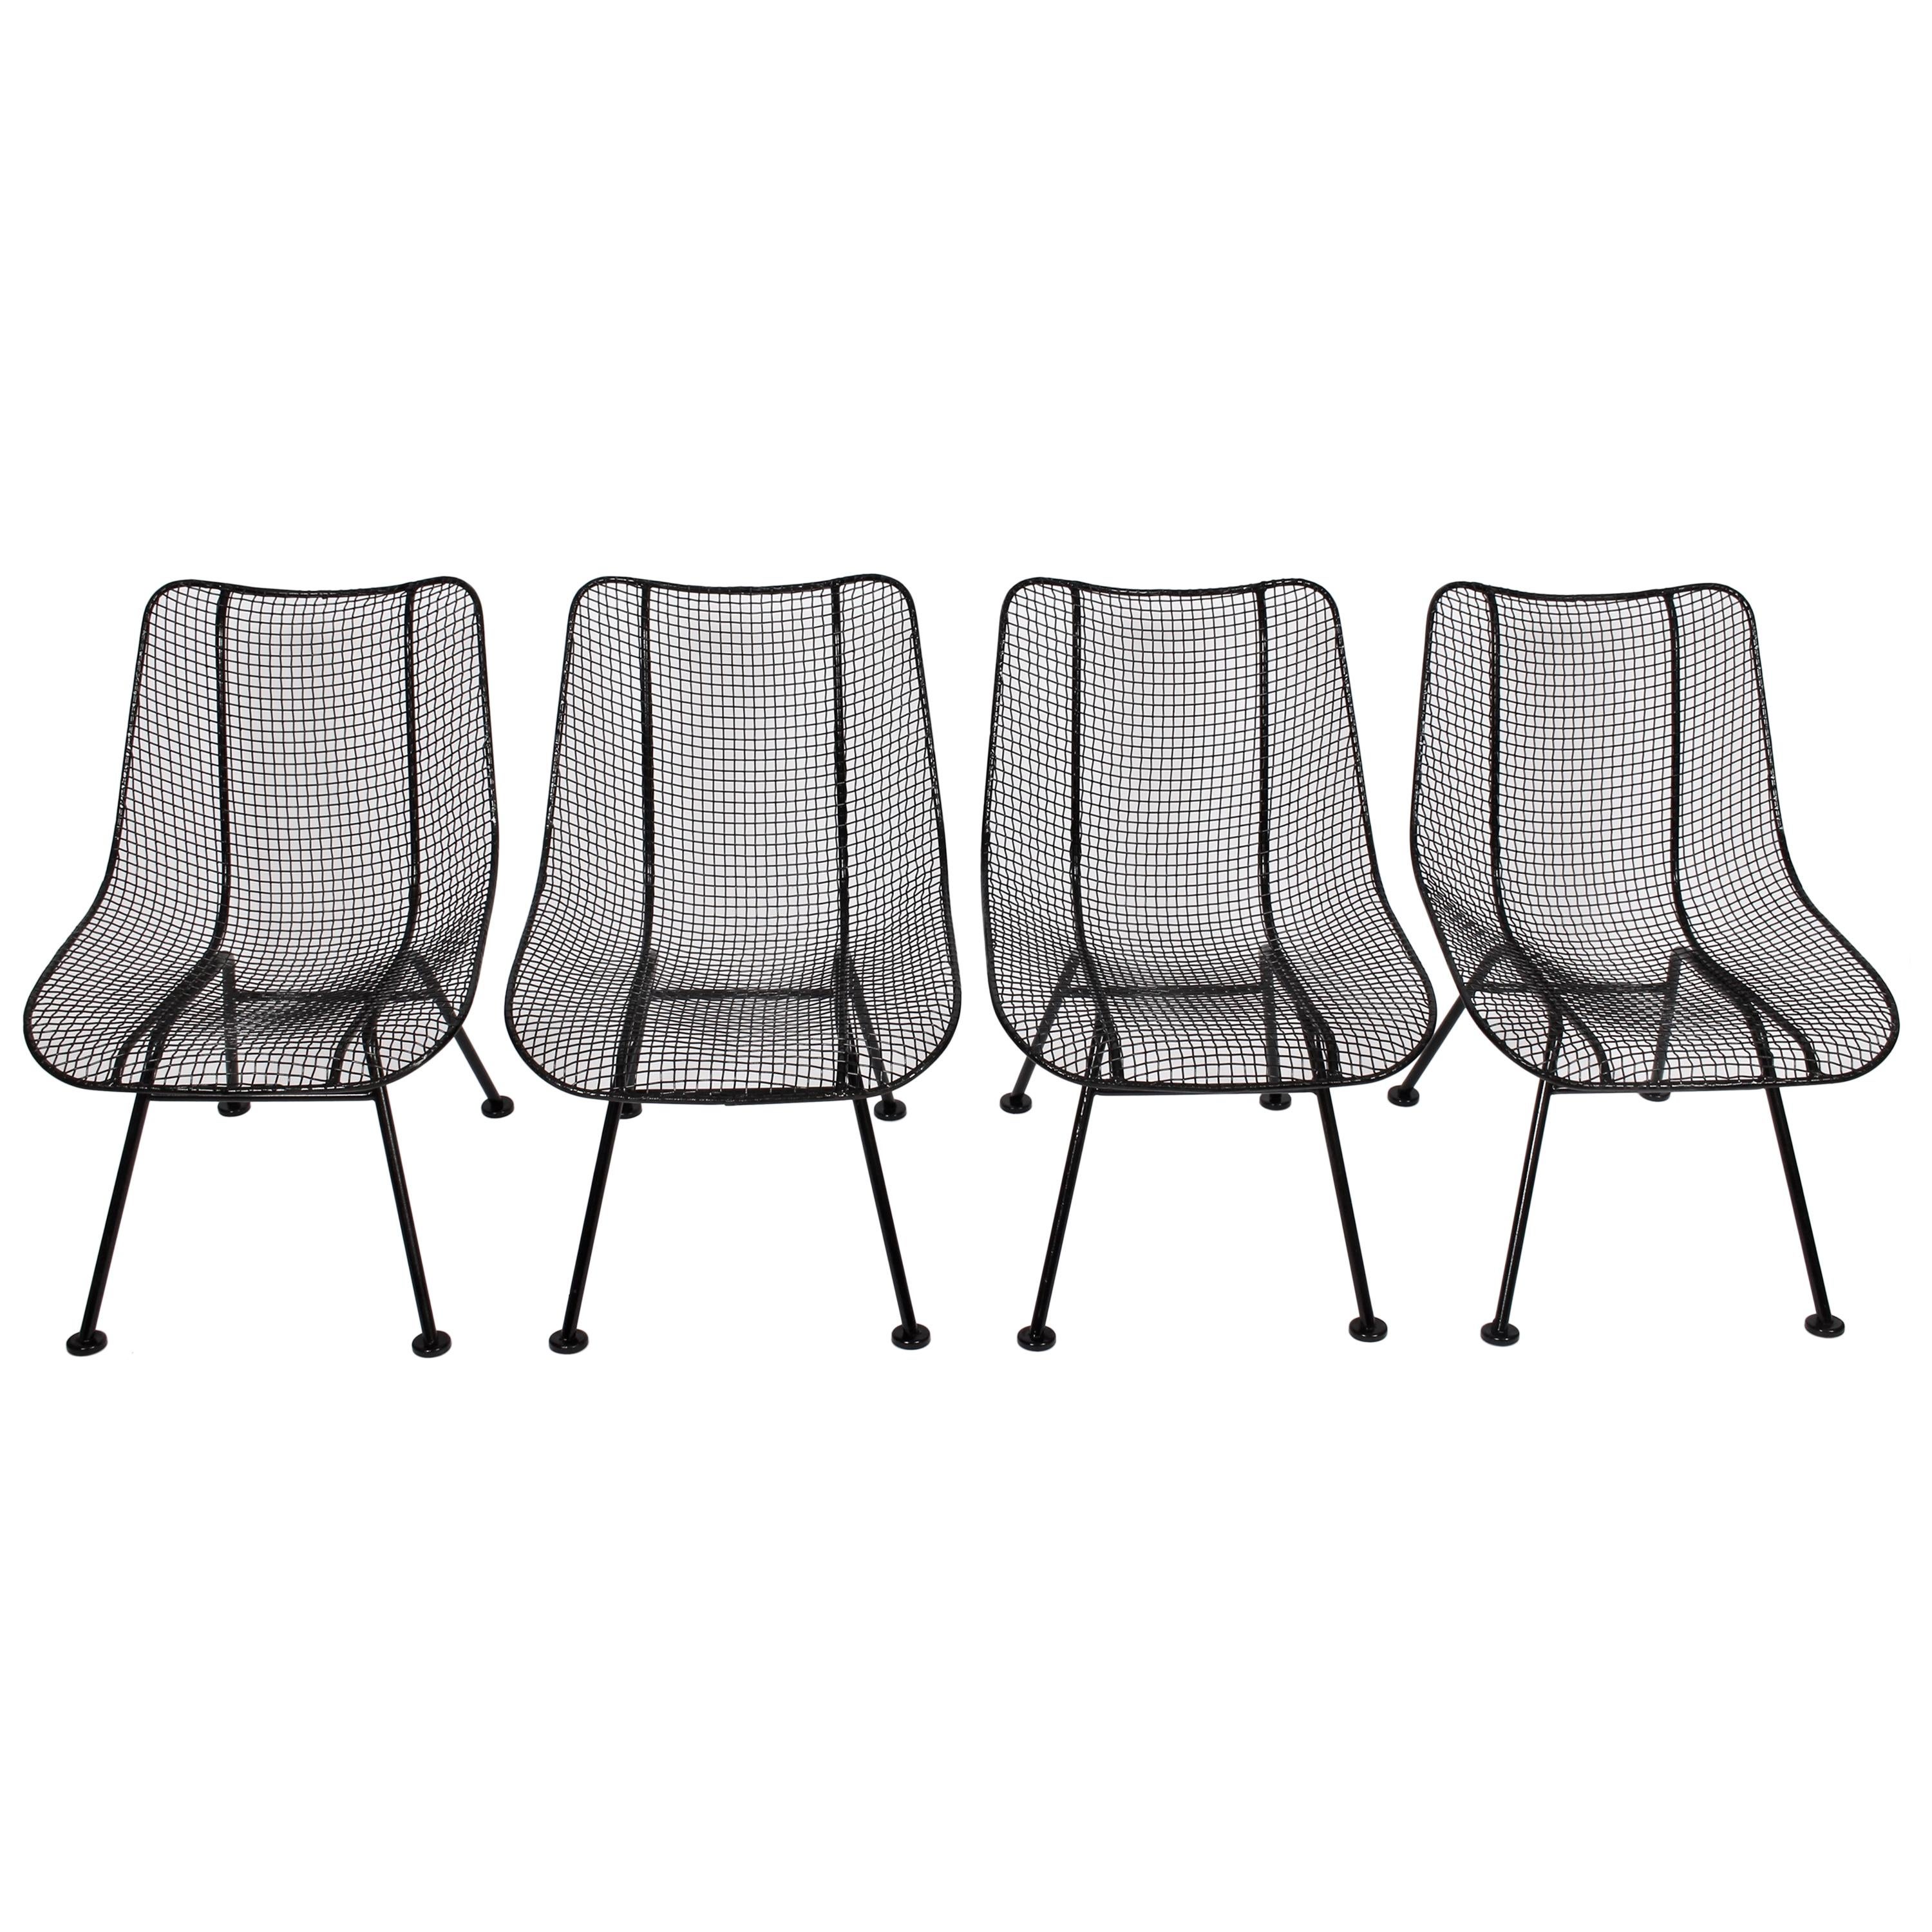 Set of Four Russell Woodard "Sculptura" Black Lanai Side Chairs, 1950s